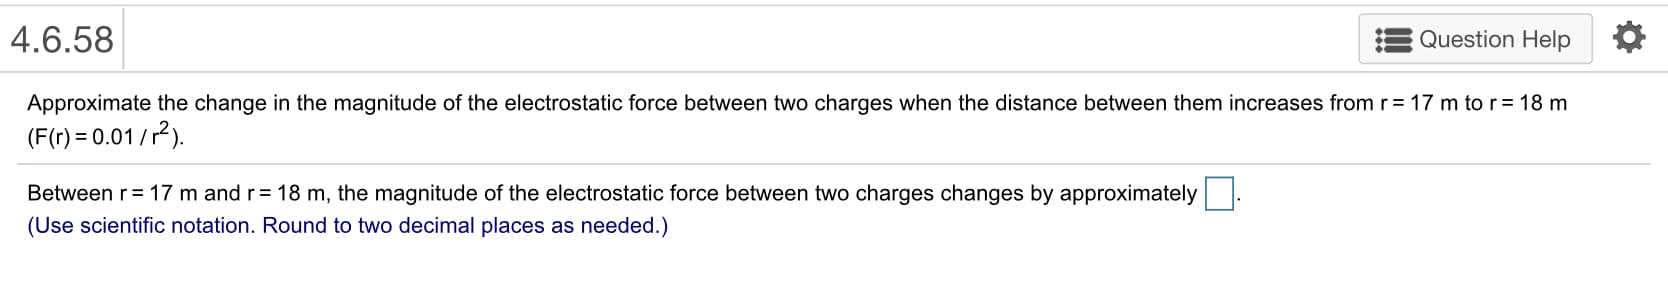 4.6.58
Question Help *
Approximate the change in the magnitude of the electrostatic force between two charges when the distance between them increases from
(F(r)0.01/2)
Between r= 17 m and r= 18 m, the magnitude of the electrostatic force between two charges changes by approximately
(Use scientific notation. Round to two decimal places as needed.)
17 m to r= 18 m
